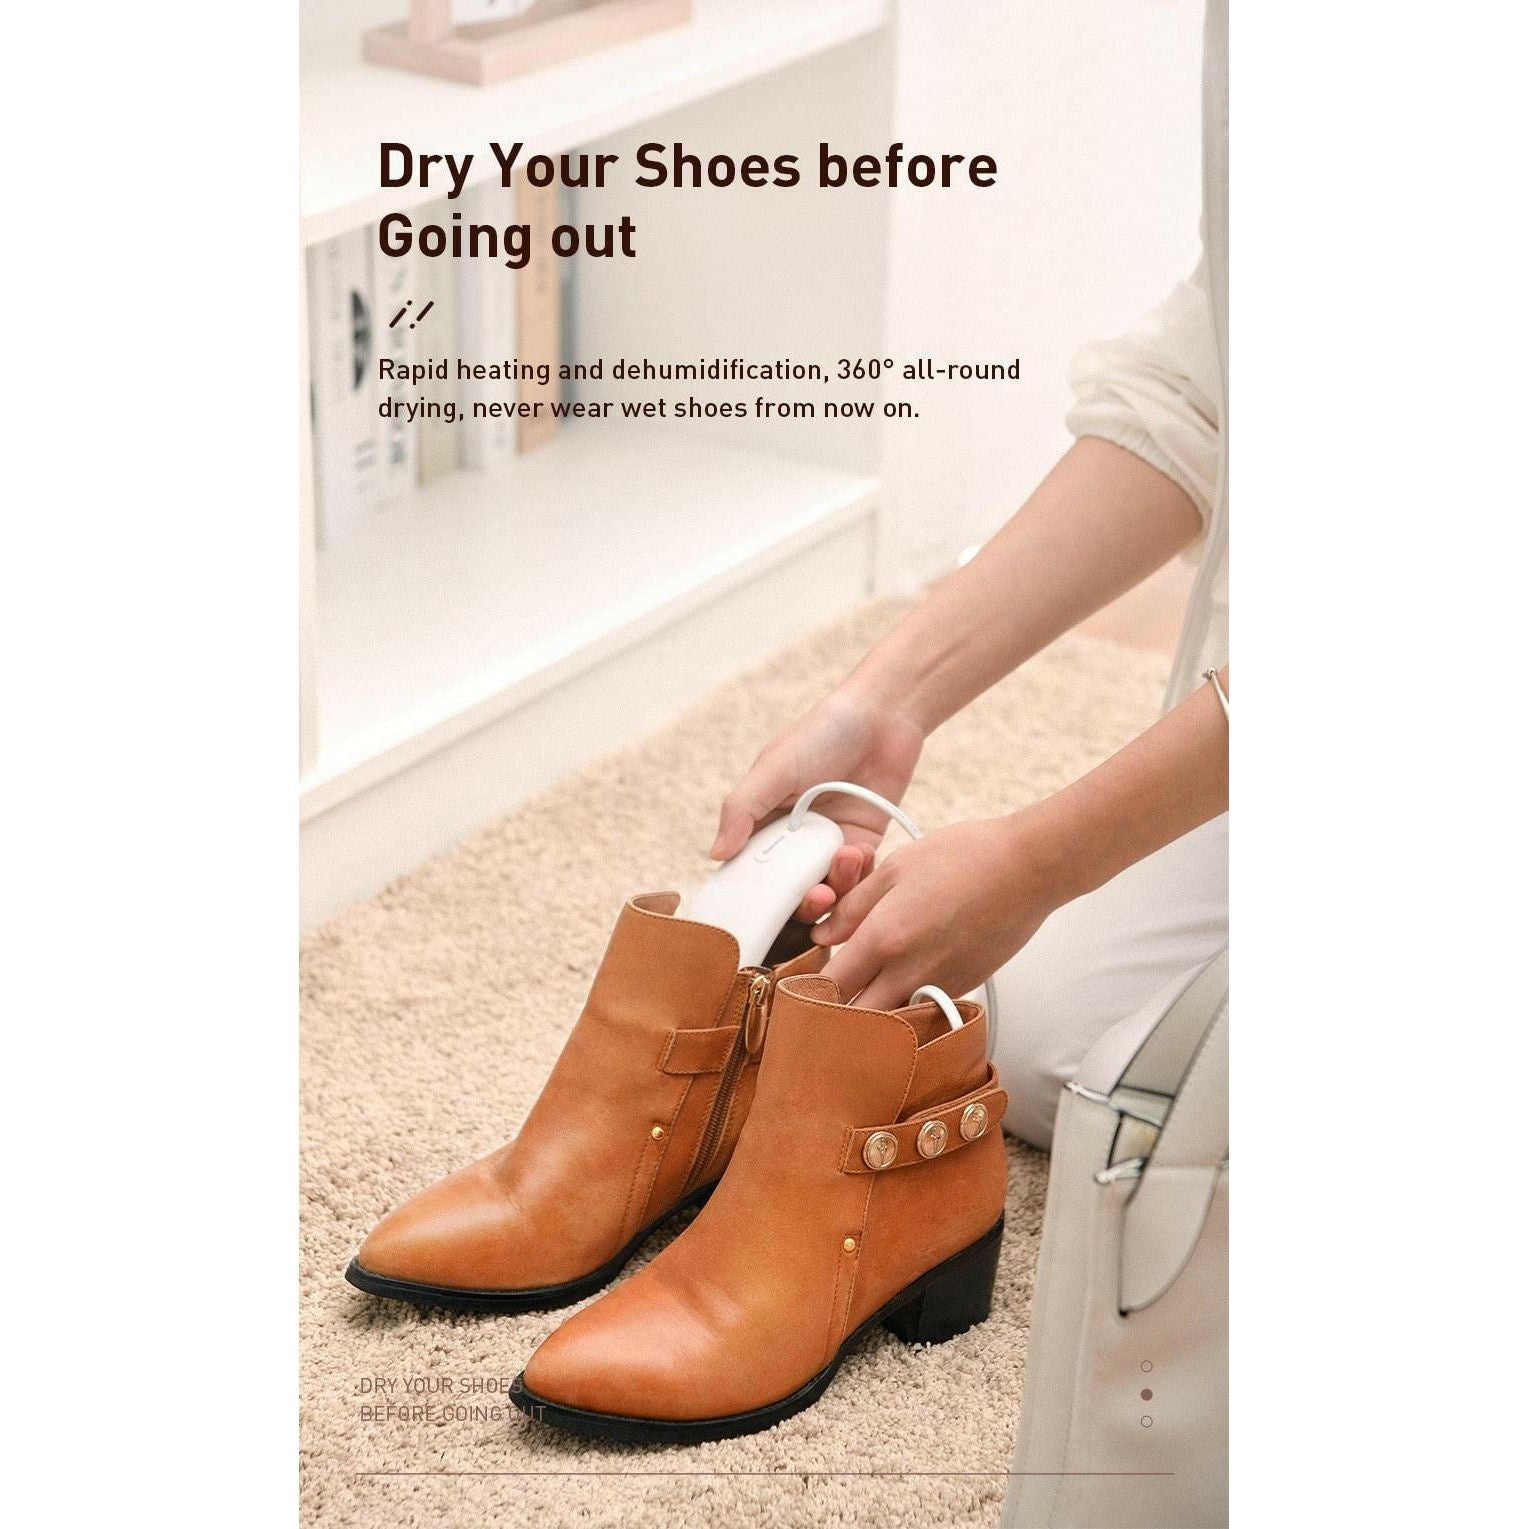 Shoe Dryer Heater Secador - Keep Your Shoes Dry and Fresh